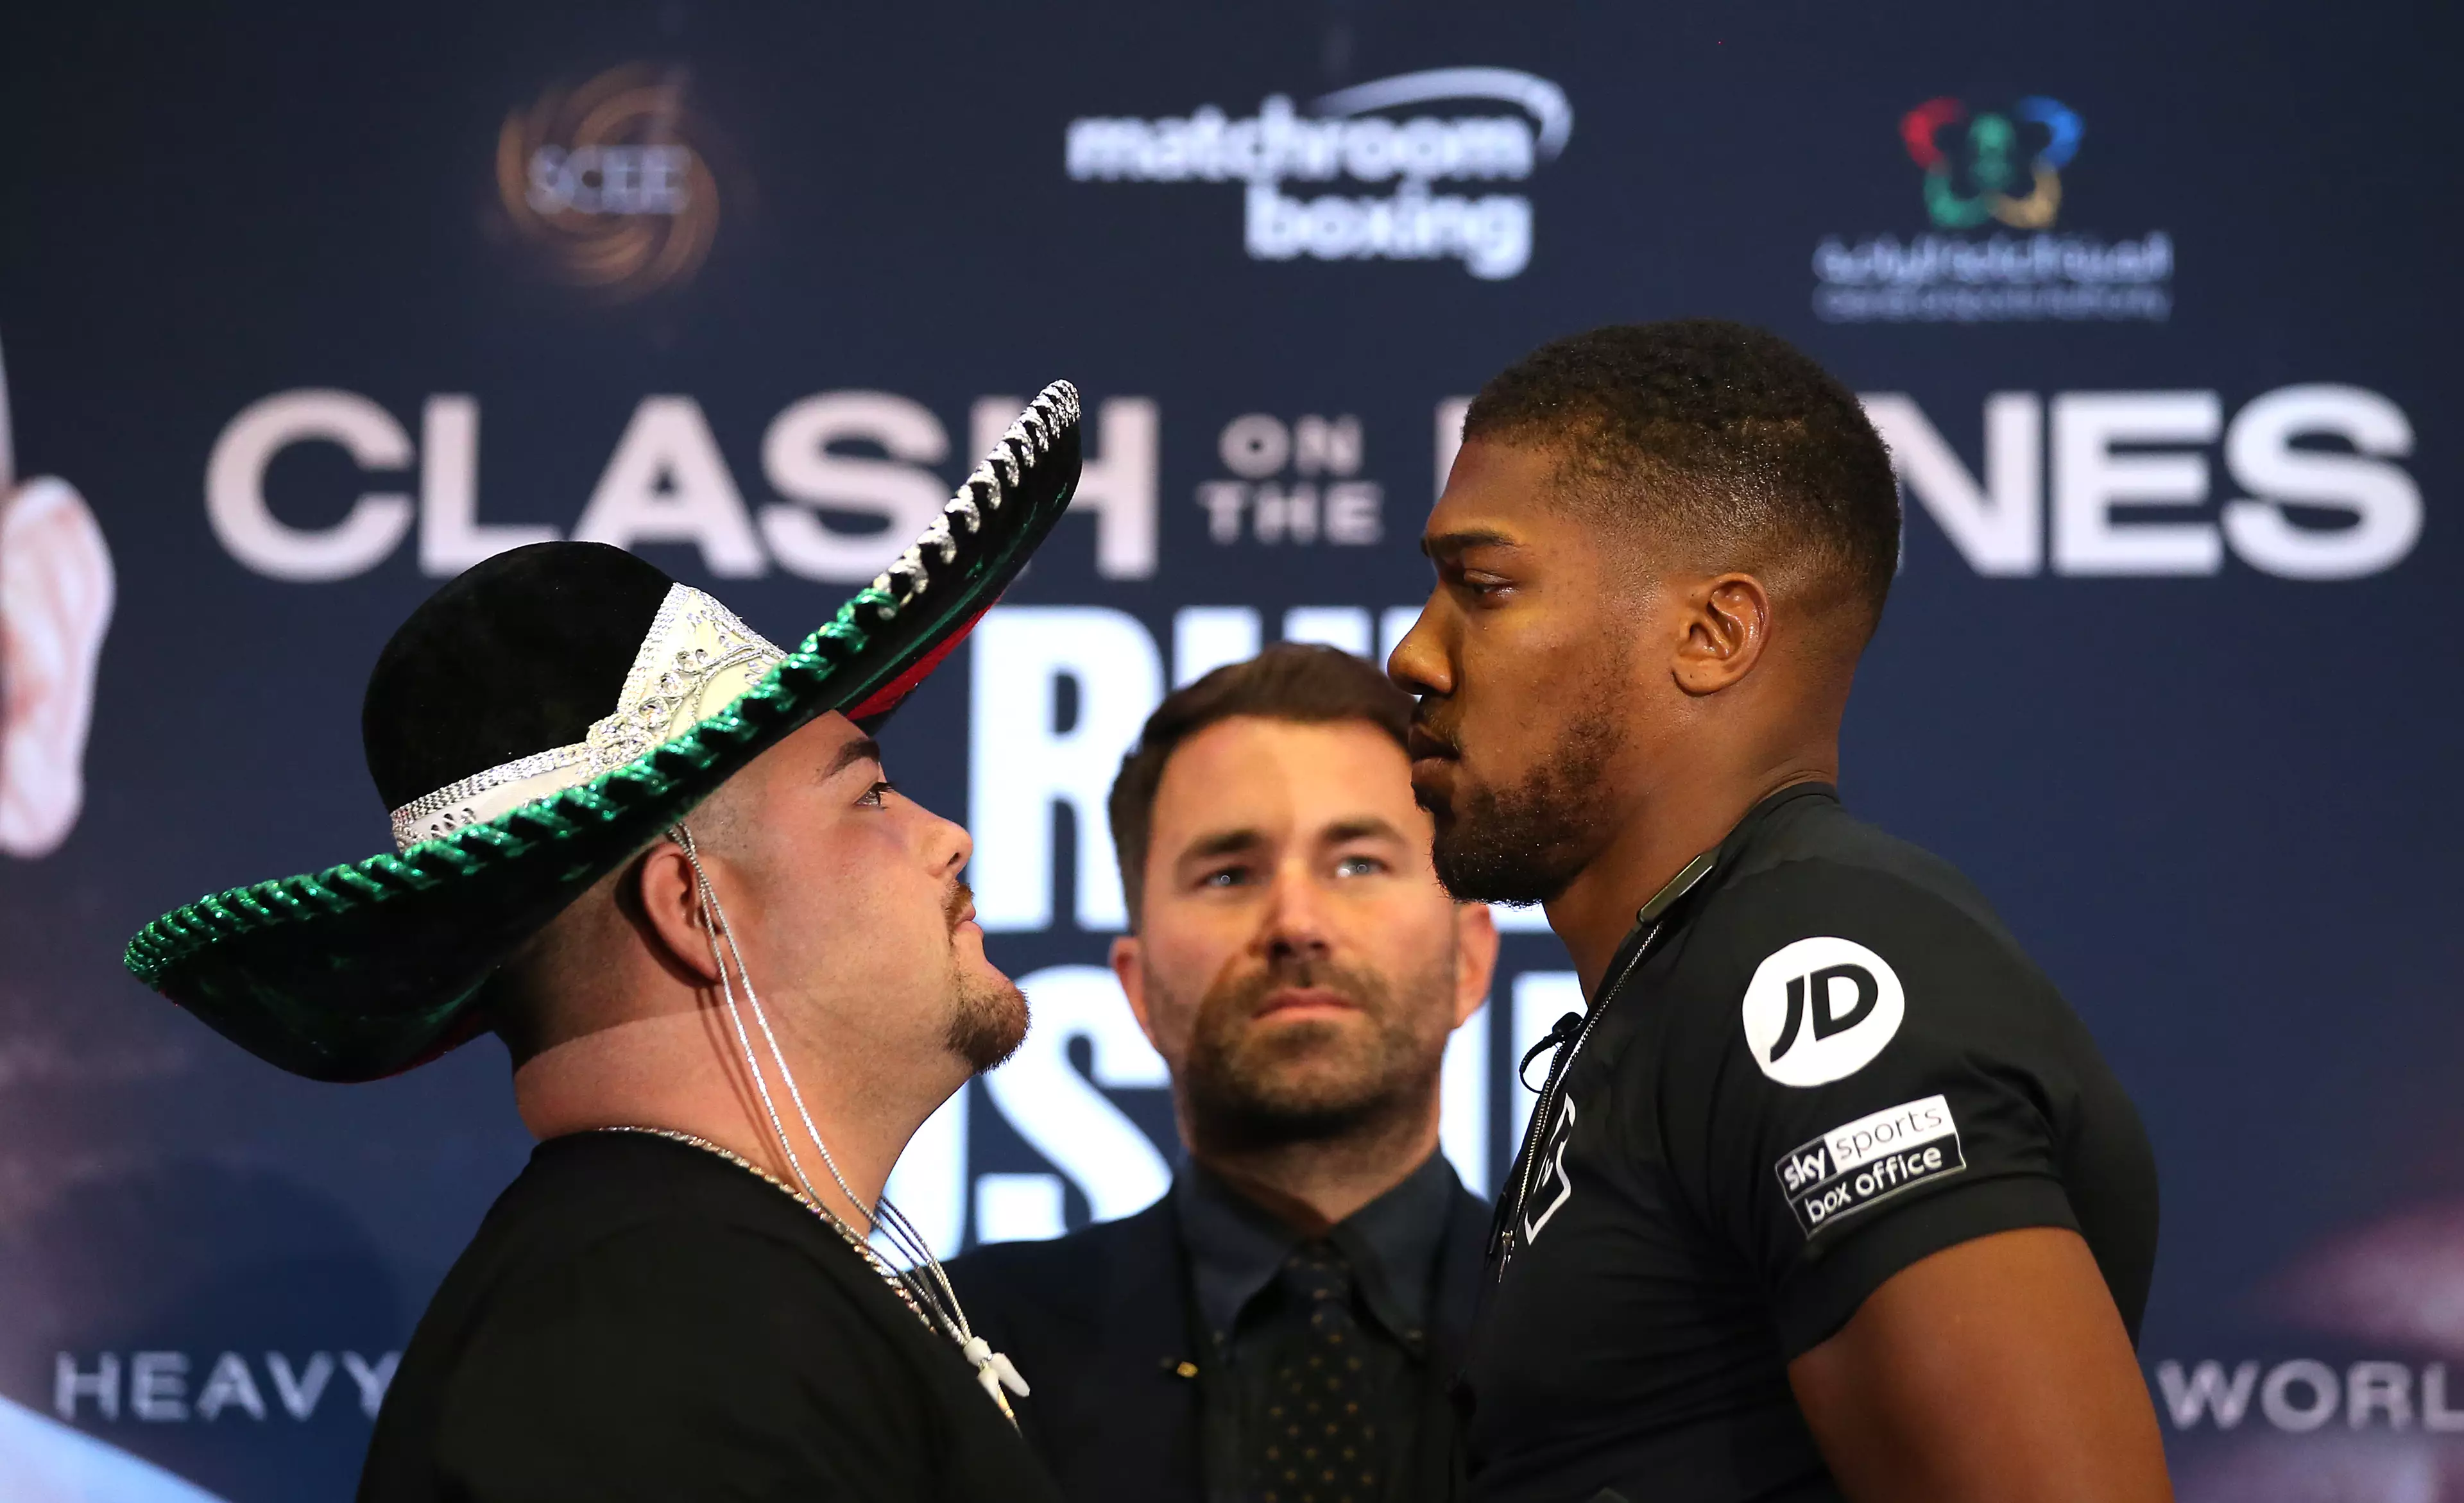 Andy Ruiz Jr will take on Anthony Joshua in a rematch in Saudi Arabia in December